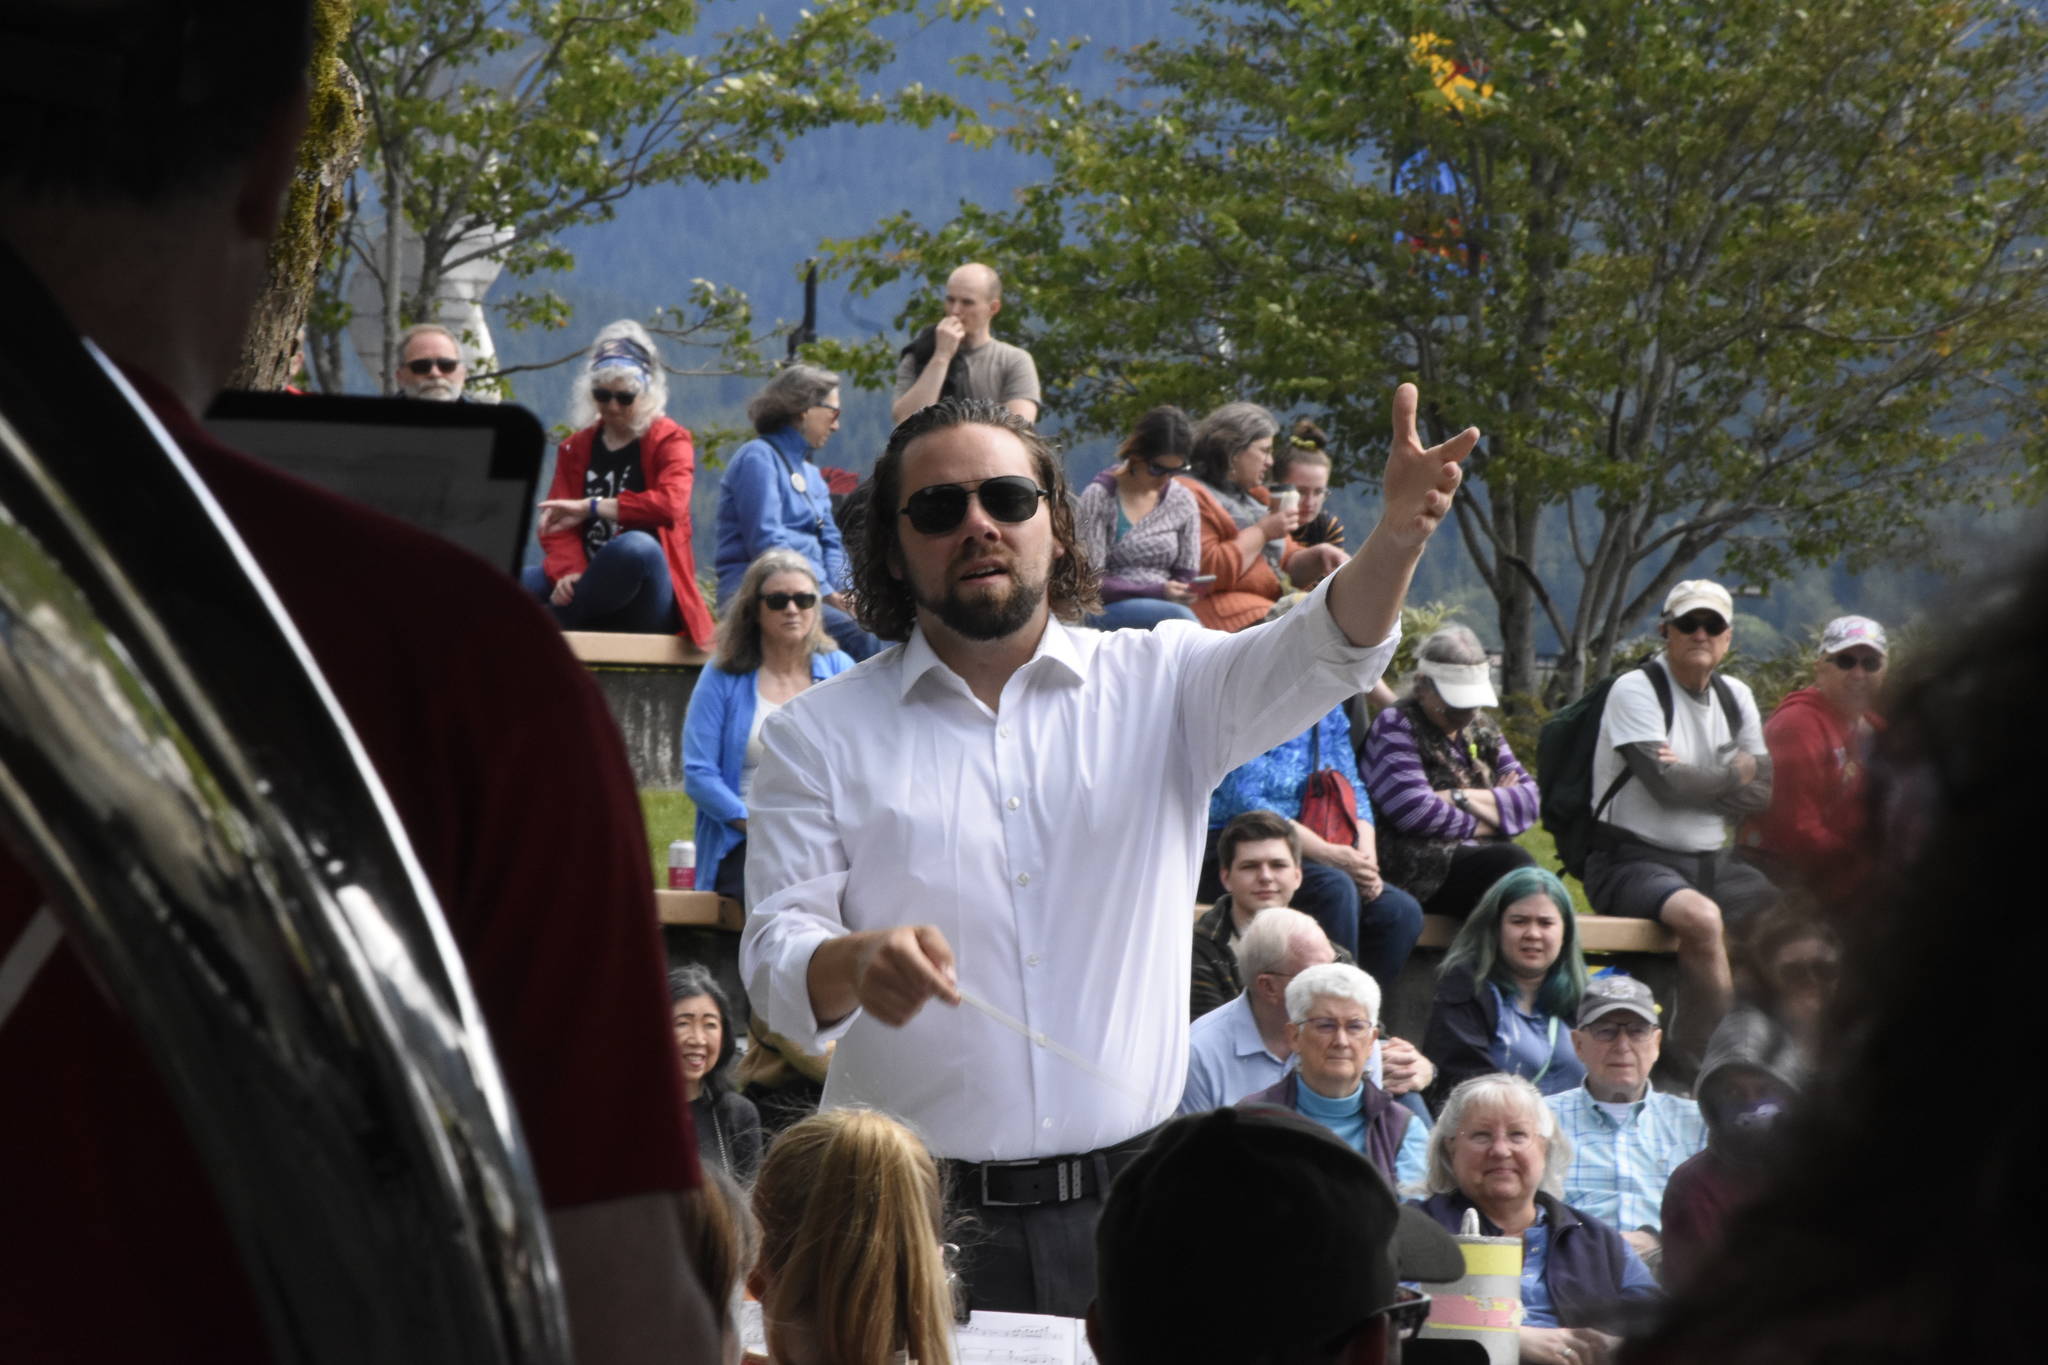 Tristan Hovest, originally from Juneau but now living in Fairbanks, serves as guest conductor for the Juneau Volunteer Marching Band on Saturday. (Peter Segall / Juneau Empire)